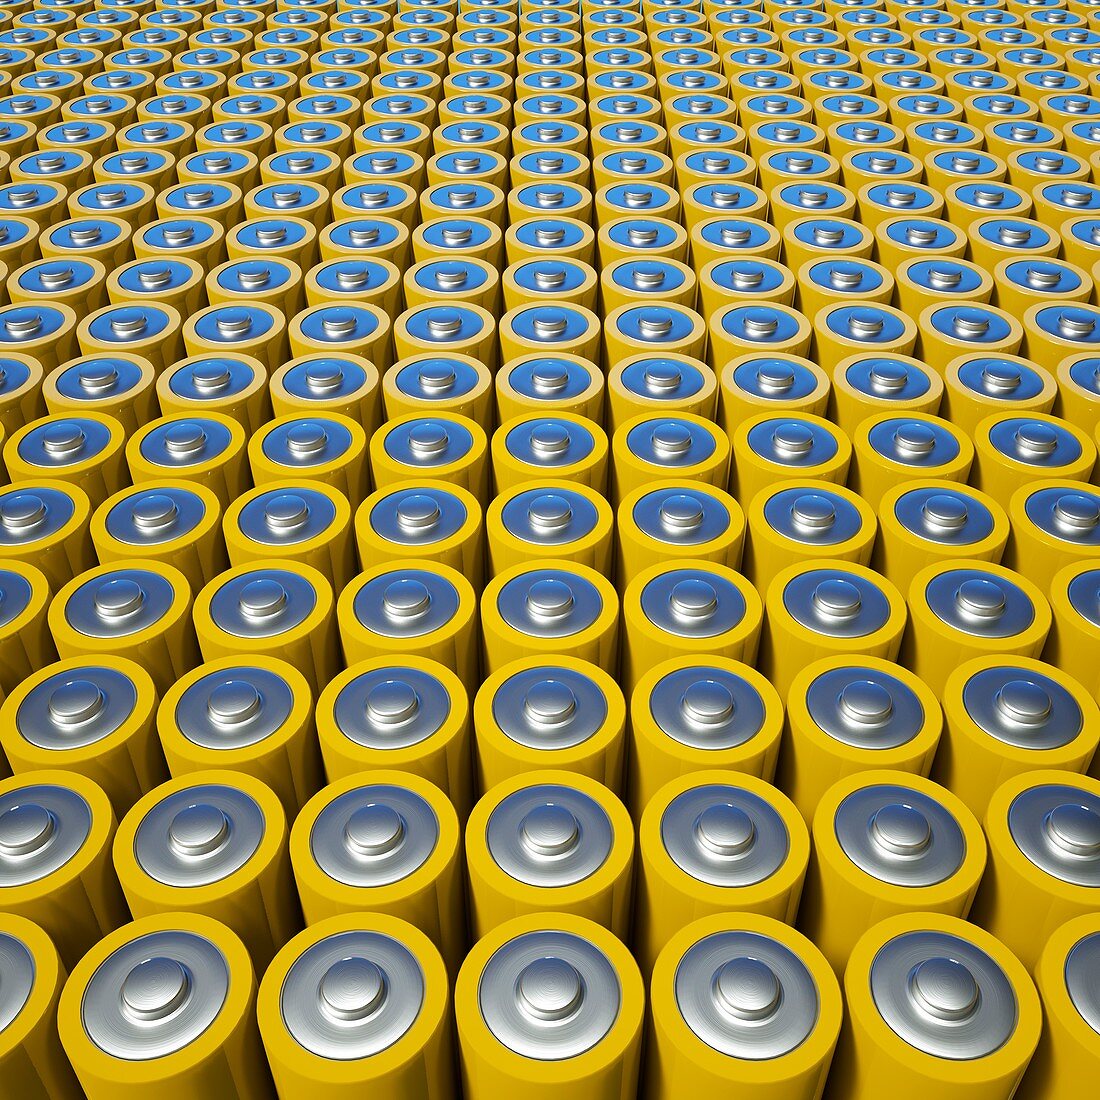 Battery or supercapacitor array